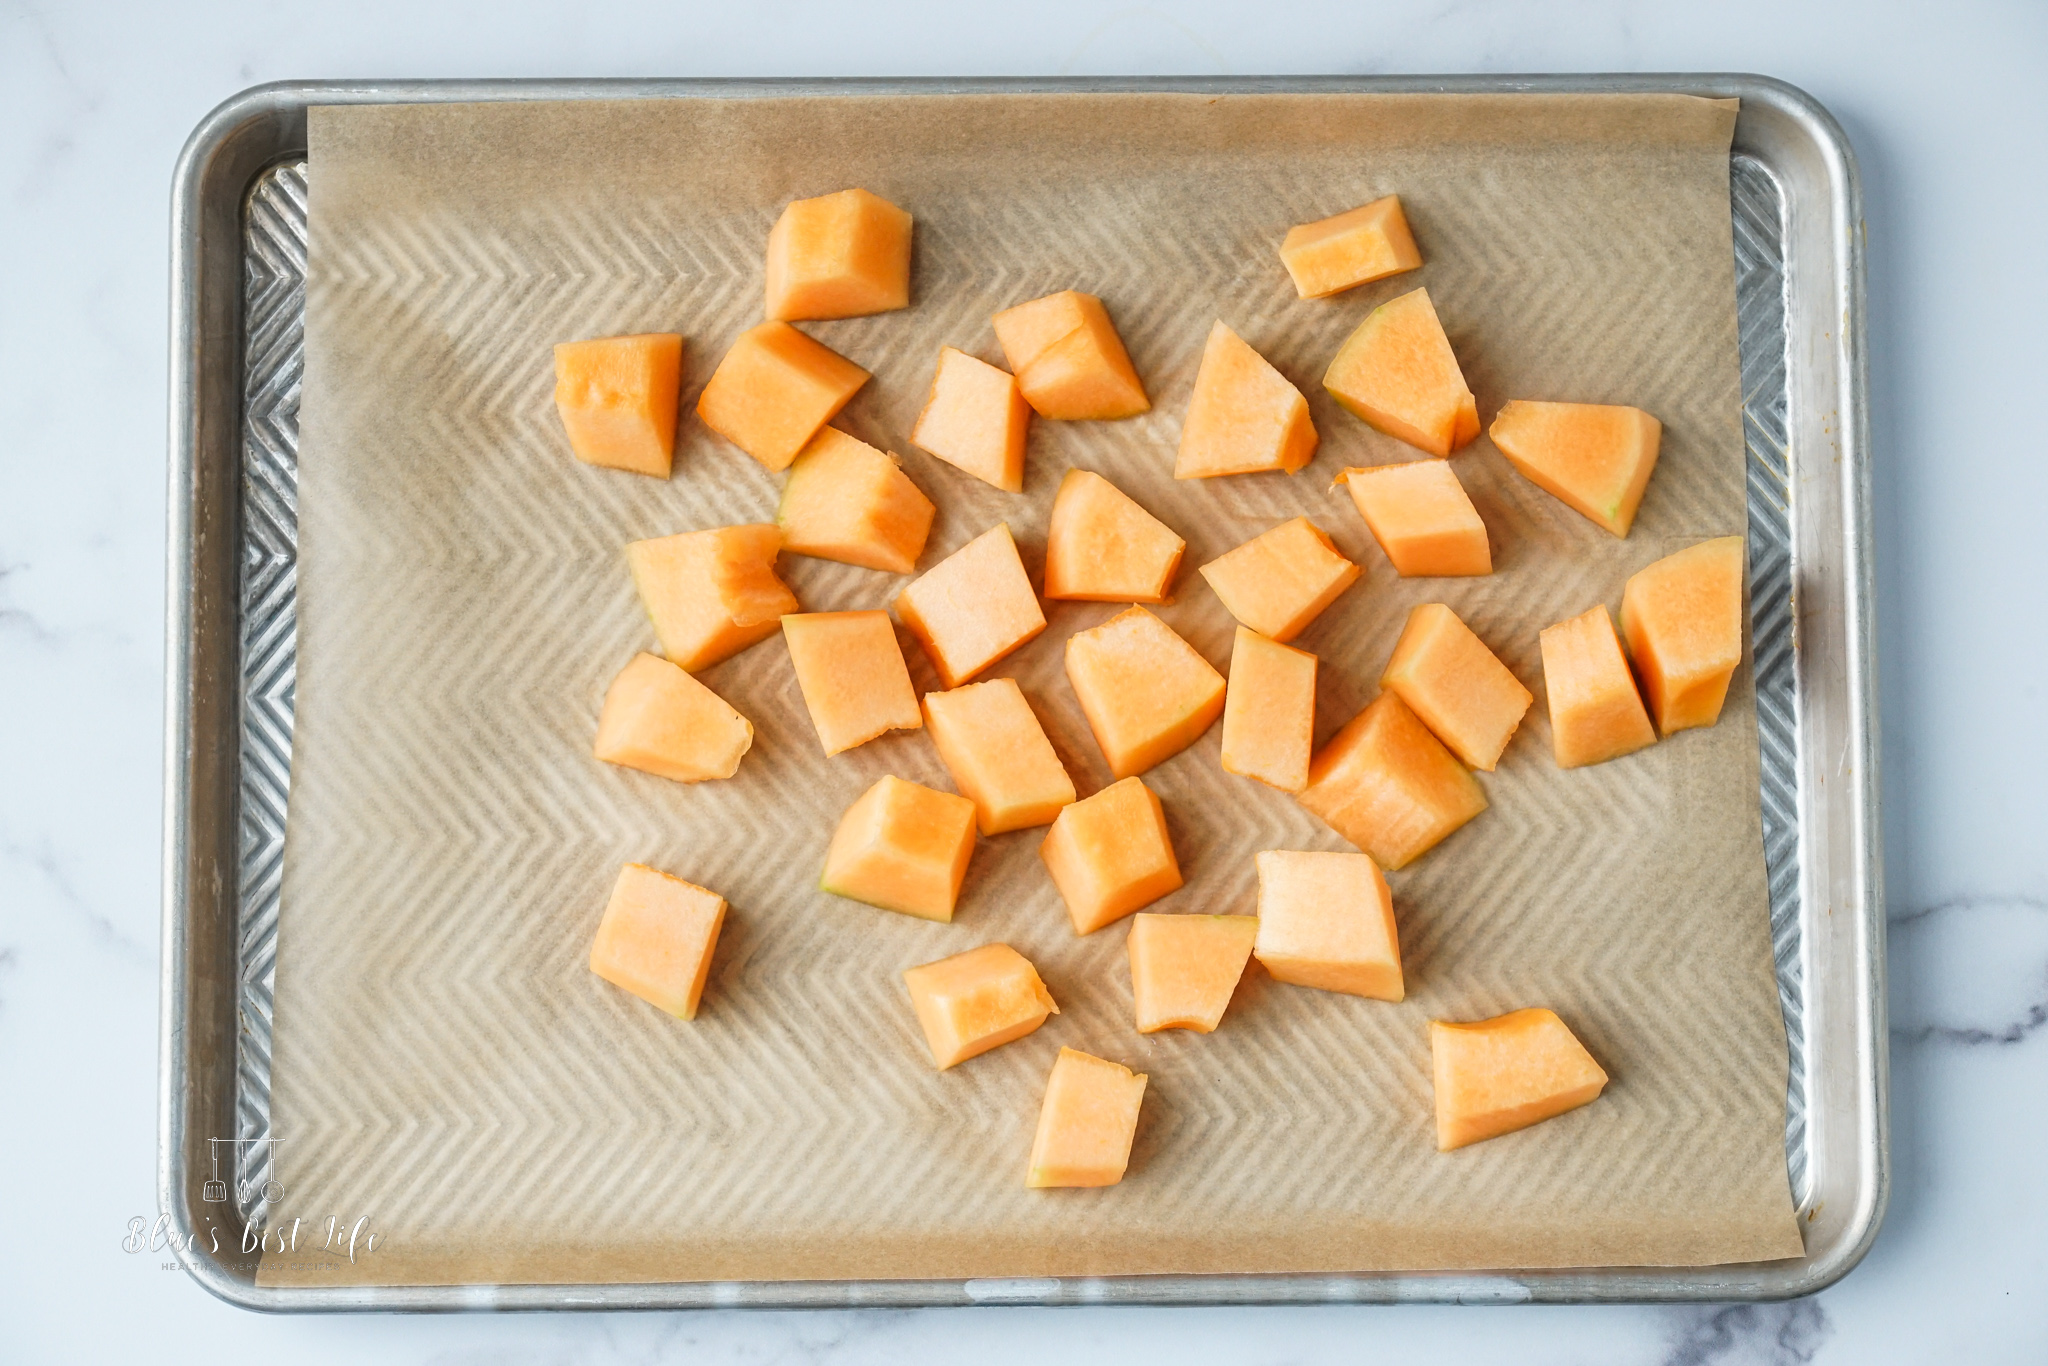 The cantaloupe chunks on a parchment lined baking sheet.  